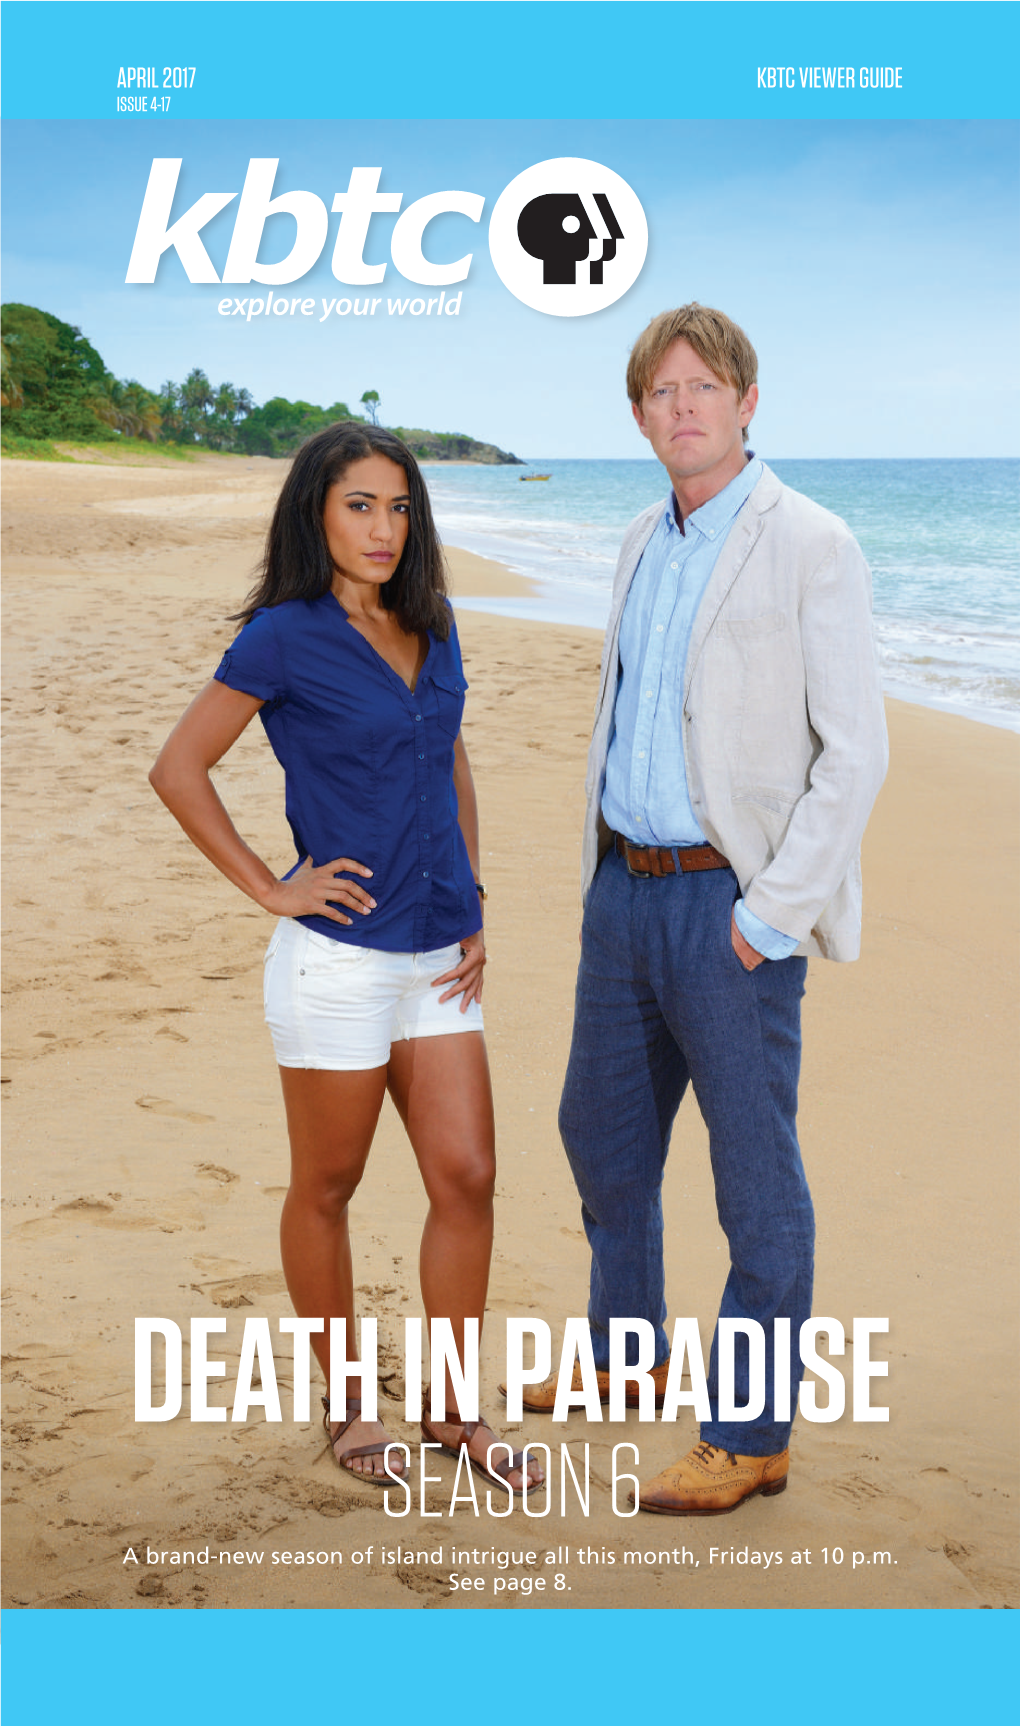 SEASON 6 a Brand-New Season of Island Intrigue All This Month, Fridays at 10 P.M